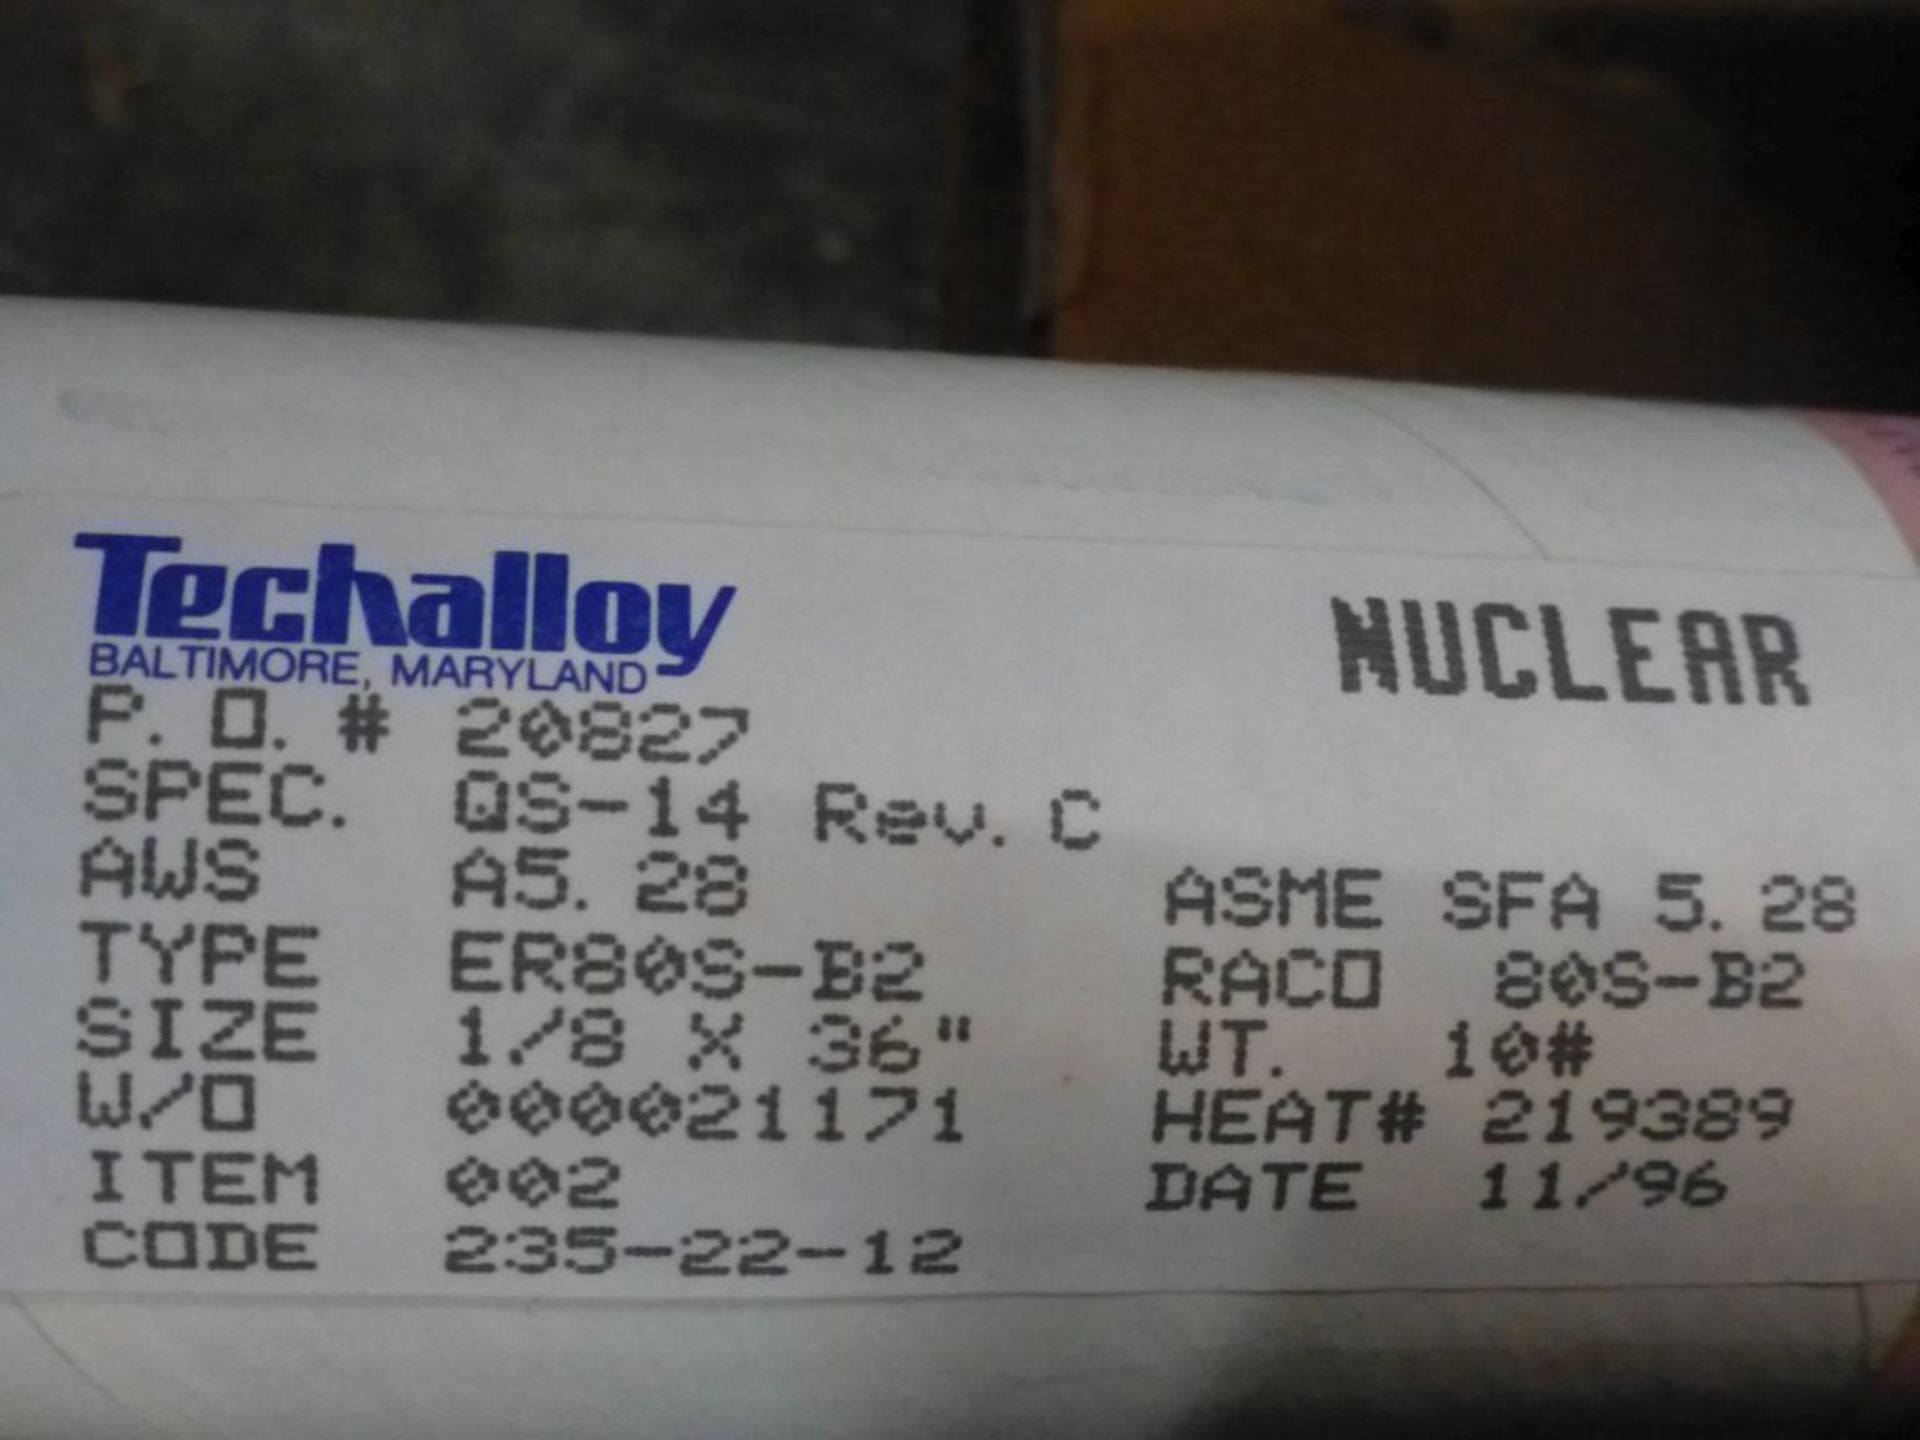 Lot of (2) Boxes of Techalloy Welding Rods|Part No. 20827; Type: ER805-B2; Size: 1/8" x 36" - Image 6 of 7